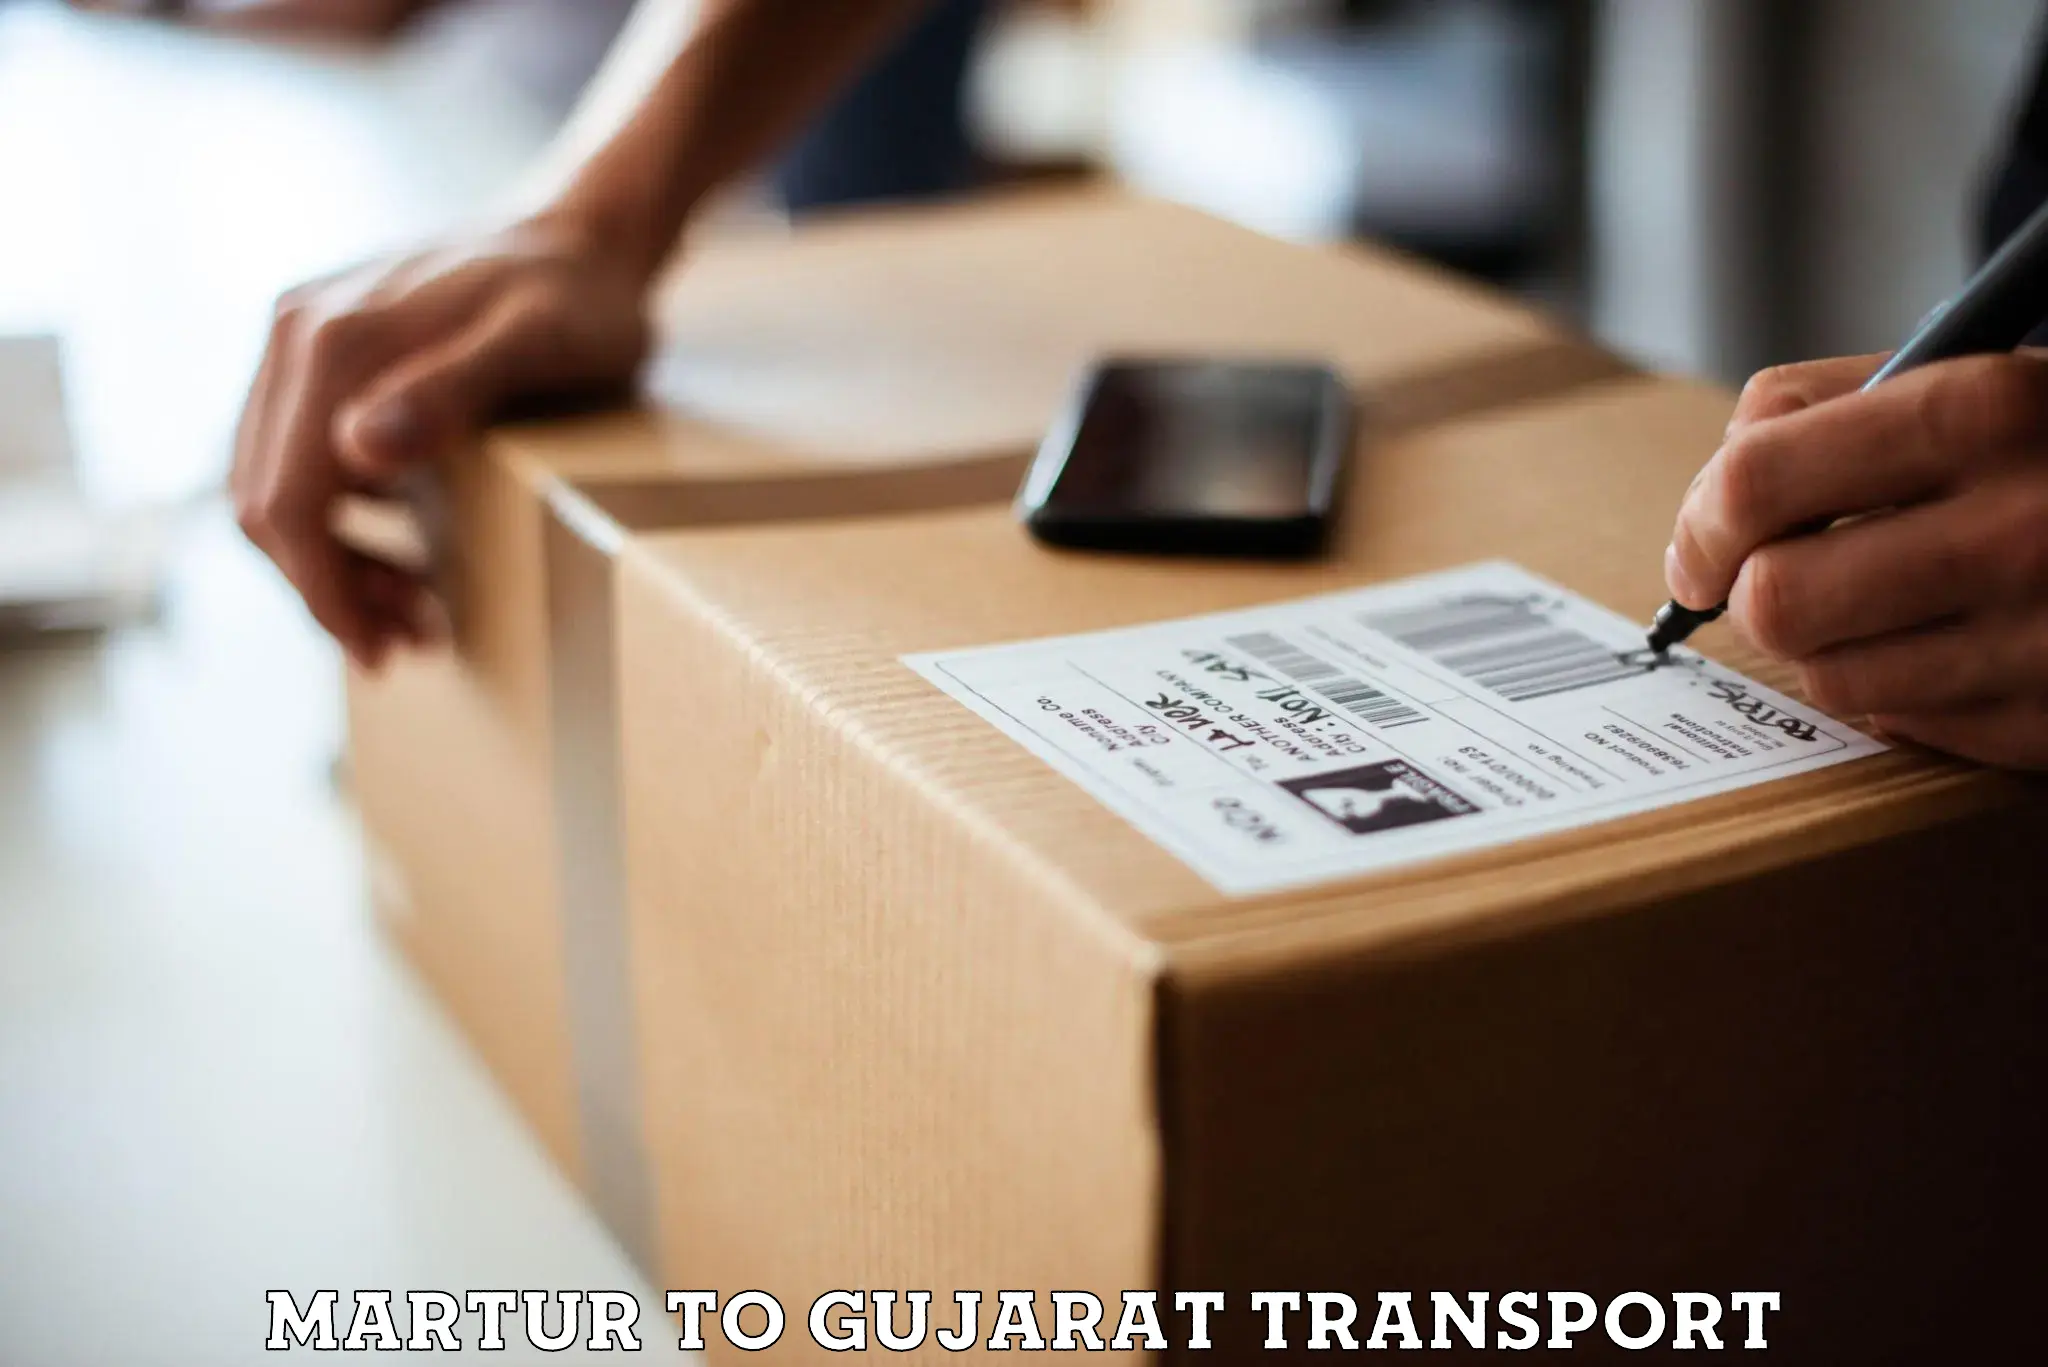 Transport shared services Martur to Bhuj